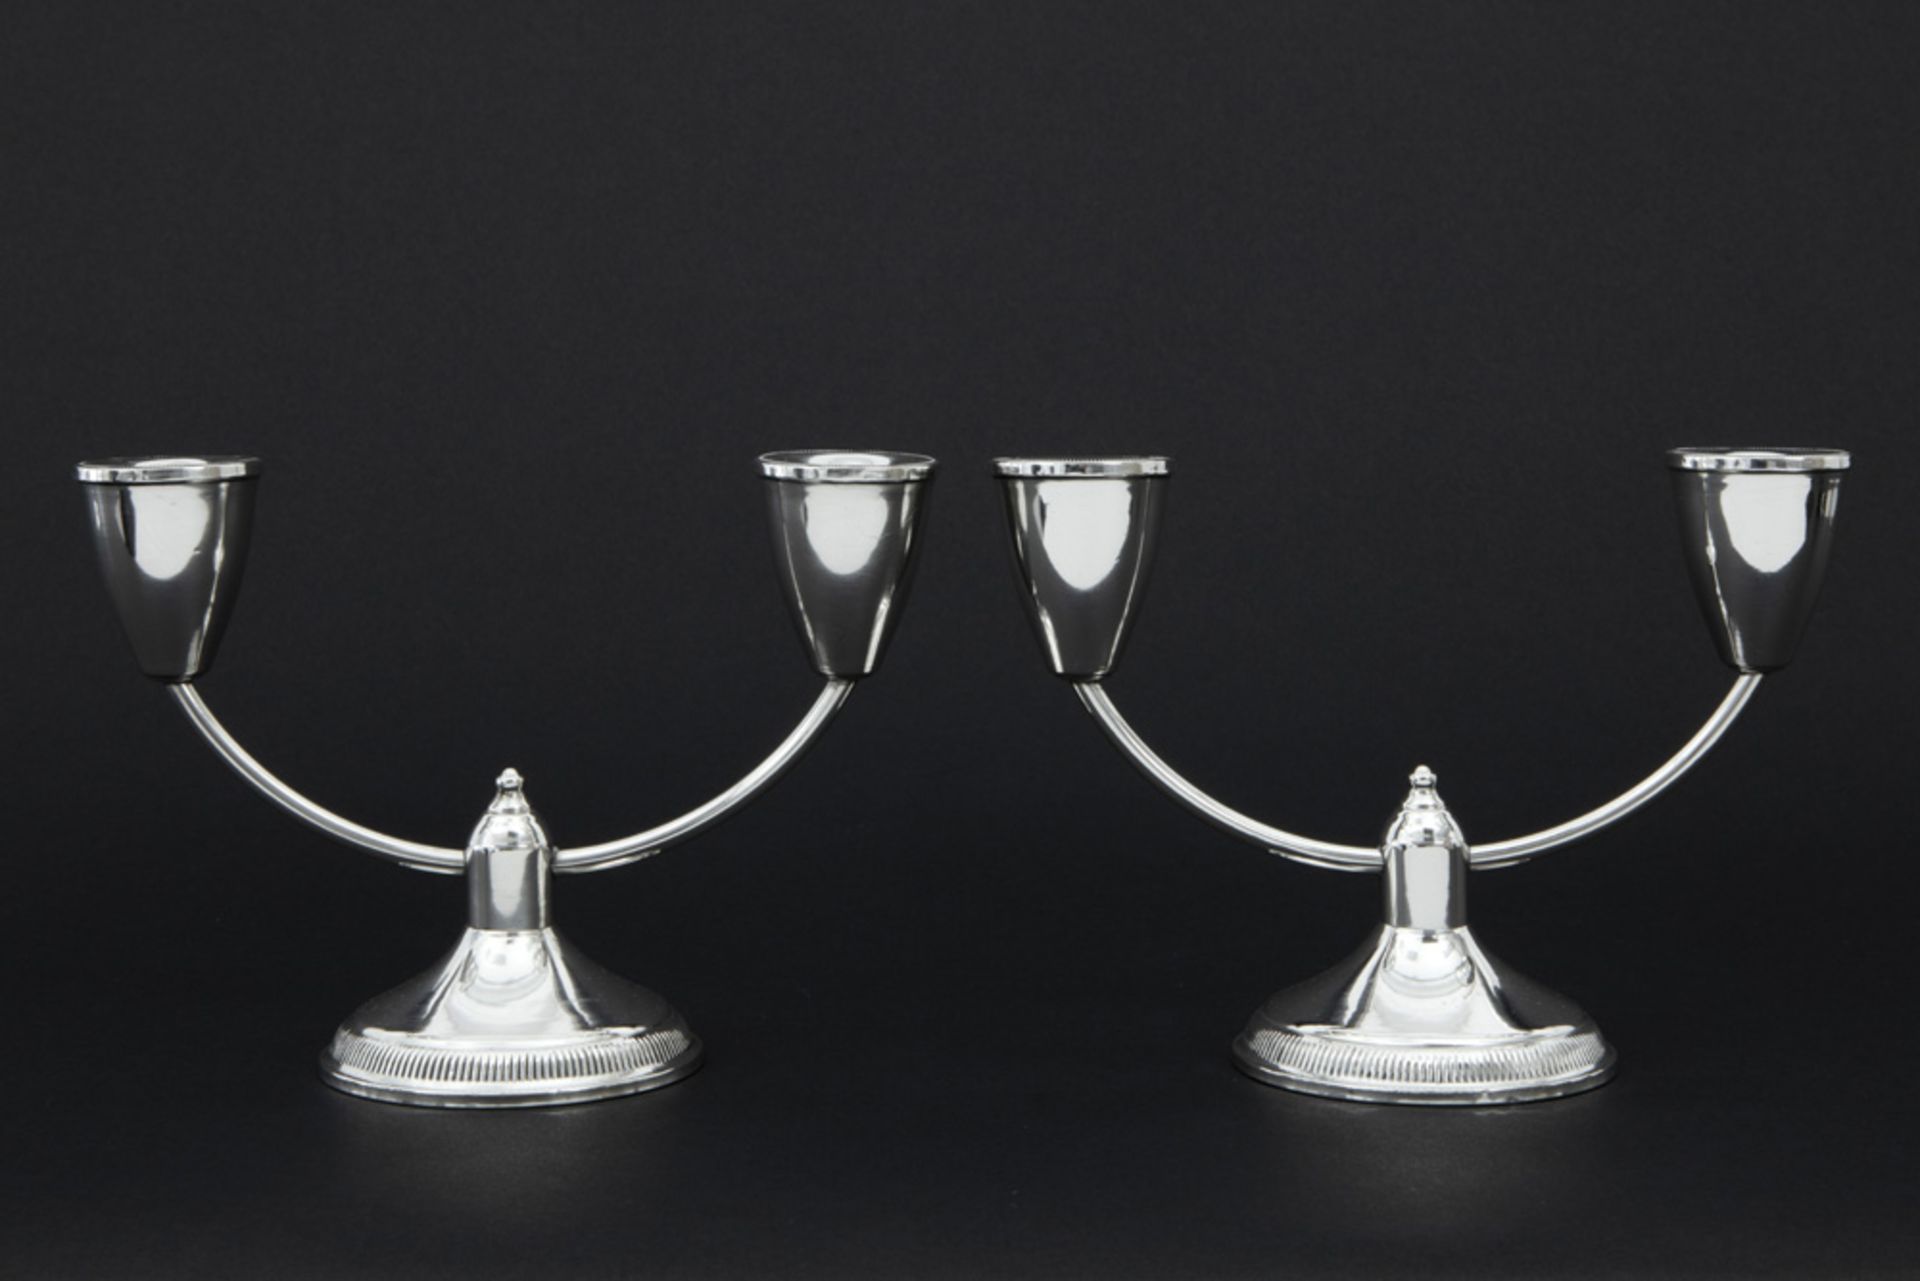 pair of fifties' American candelabras in marked silver - signed||DUCHIN paar Amerikaanse fifies'